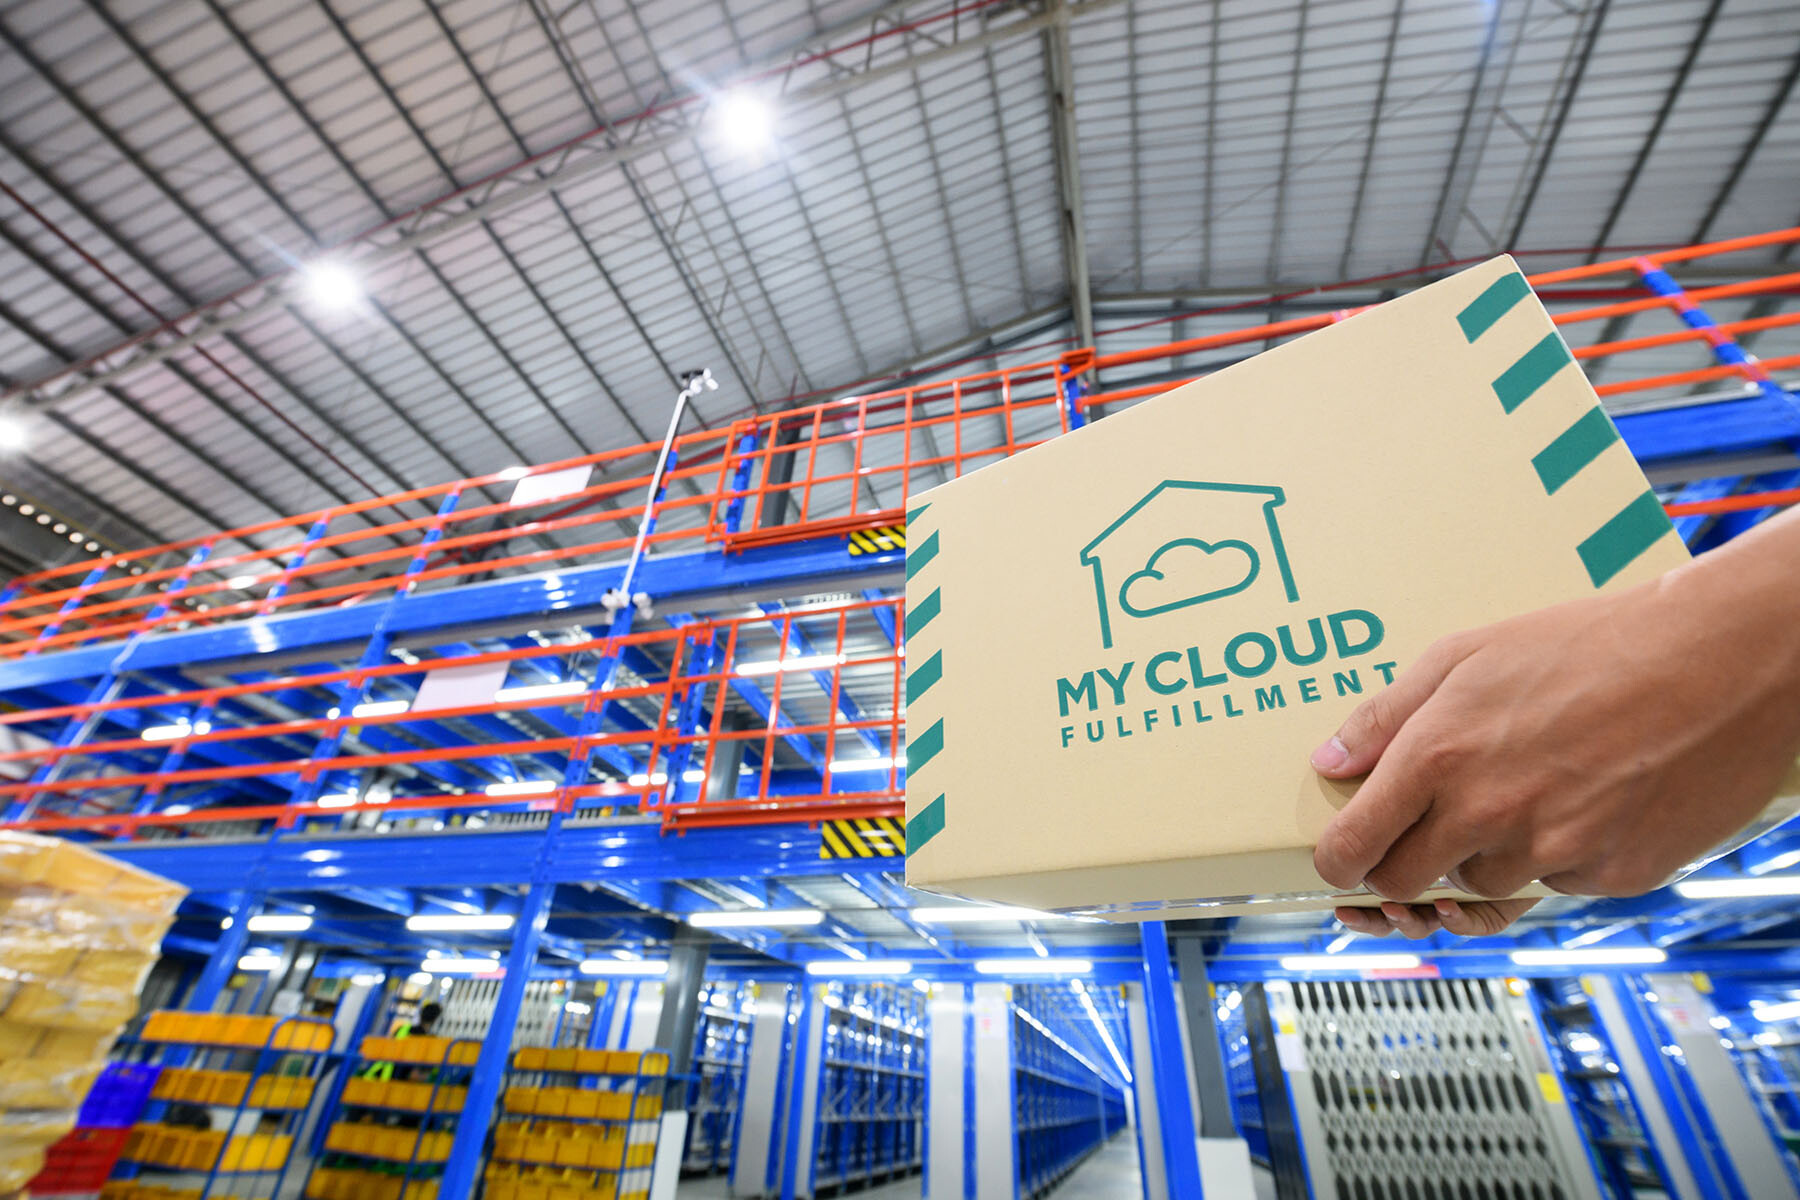 MyCloudFulfillment, Order Fulfillment startup in Thailand, has raised Series B total of $7.4M from JWD Group and SCB 10X